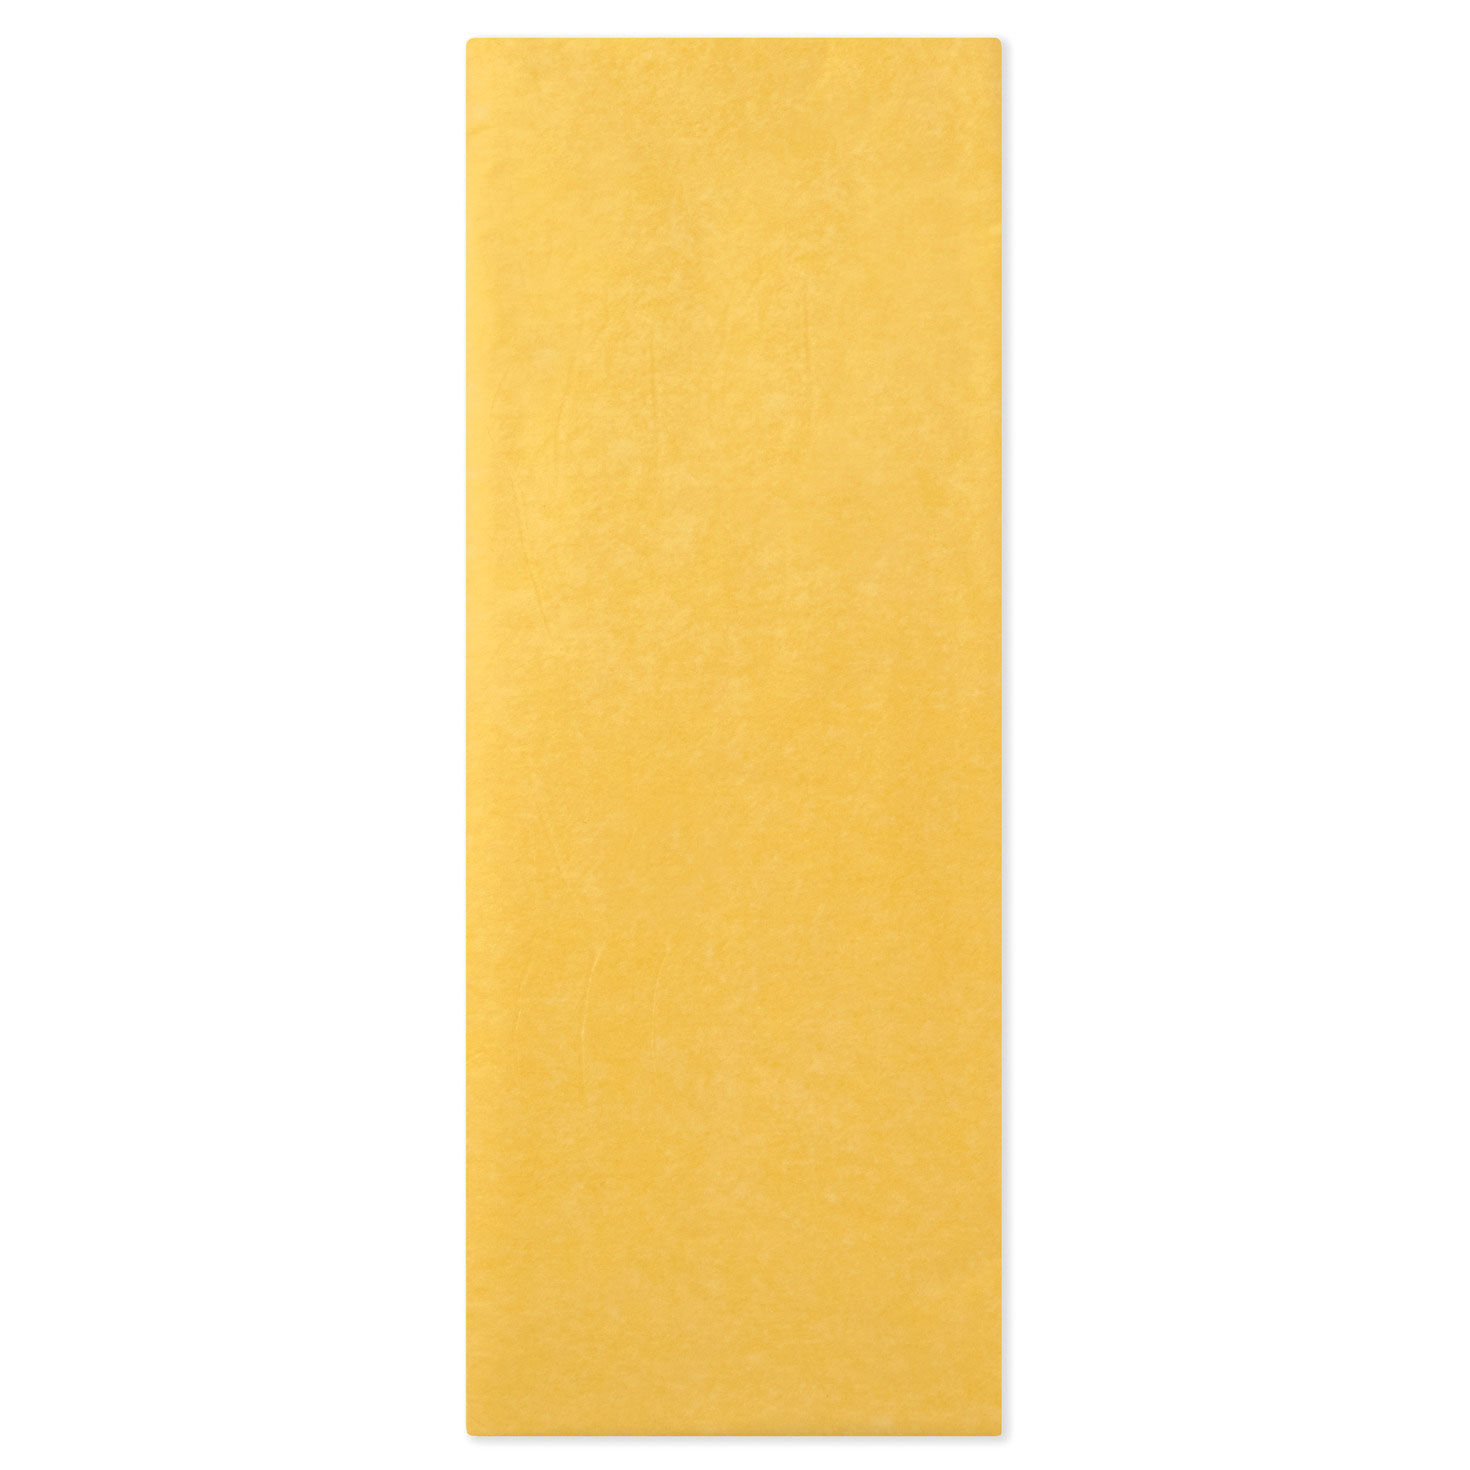 Yellow Butter Paper for Baking(Pack of 10 Sheets)